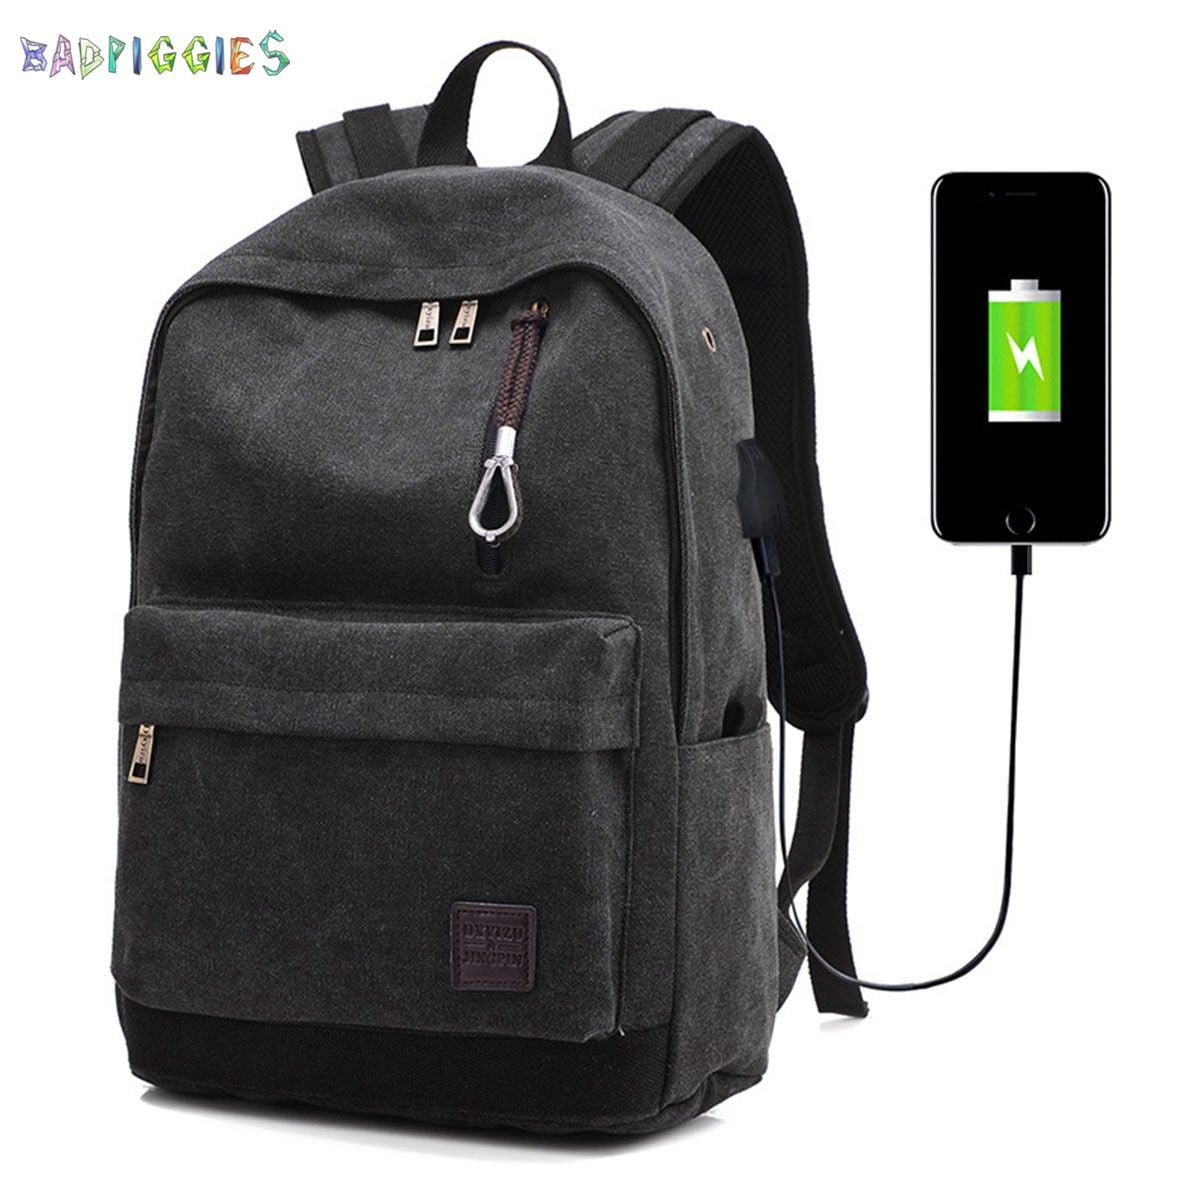 Mens Backpack Mens Rucksack Casual Canvas Backpack Fits 14 Inch Laptop for Travel Daily Life Travel Laptop Backpack Color : Green, Size : Free Size